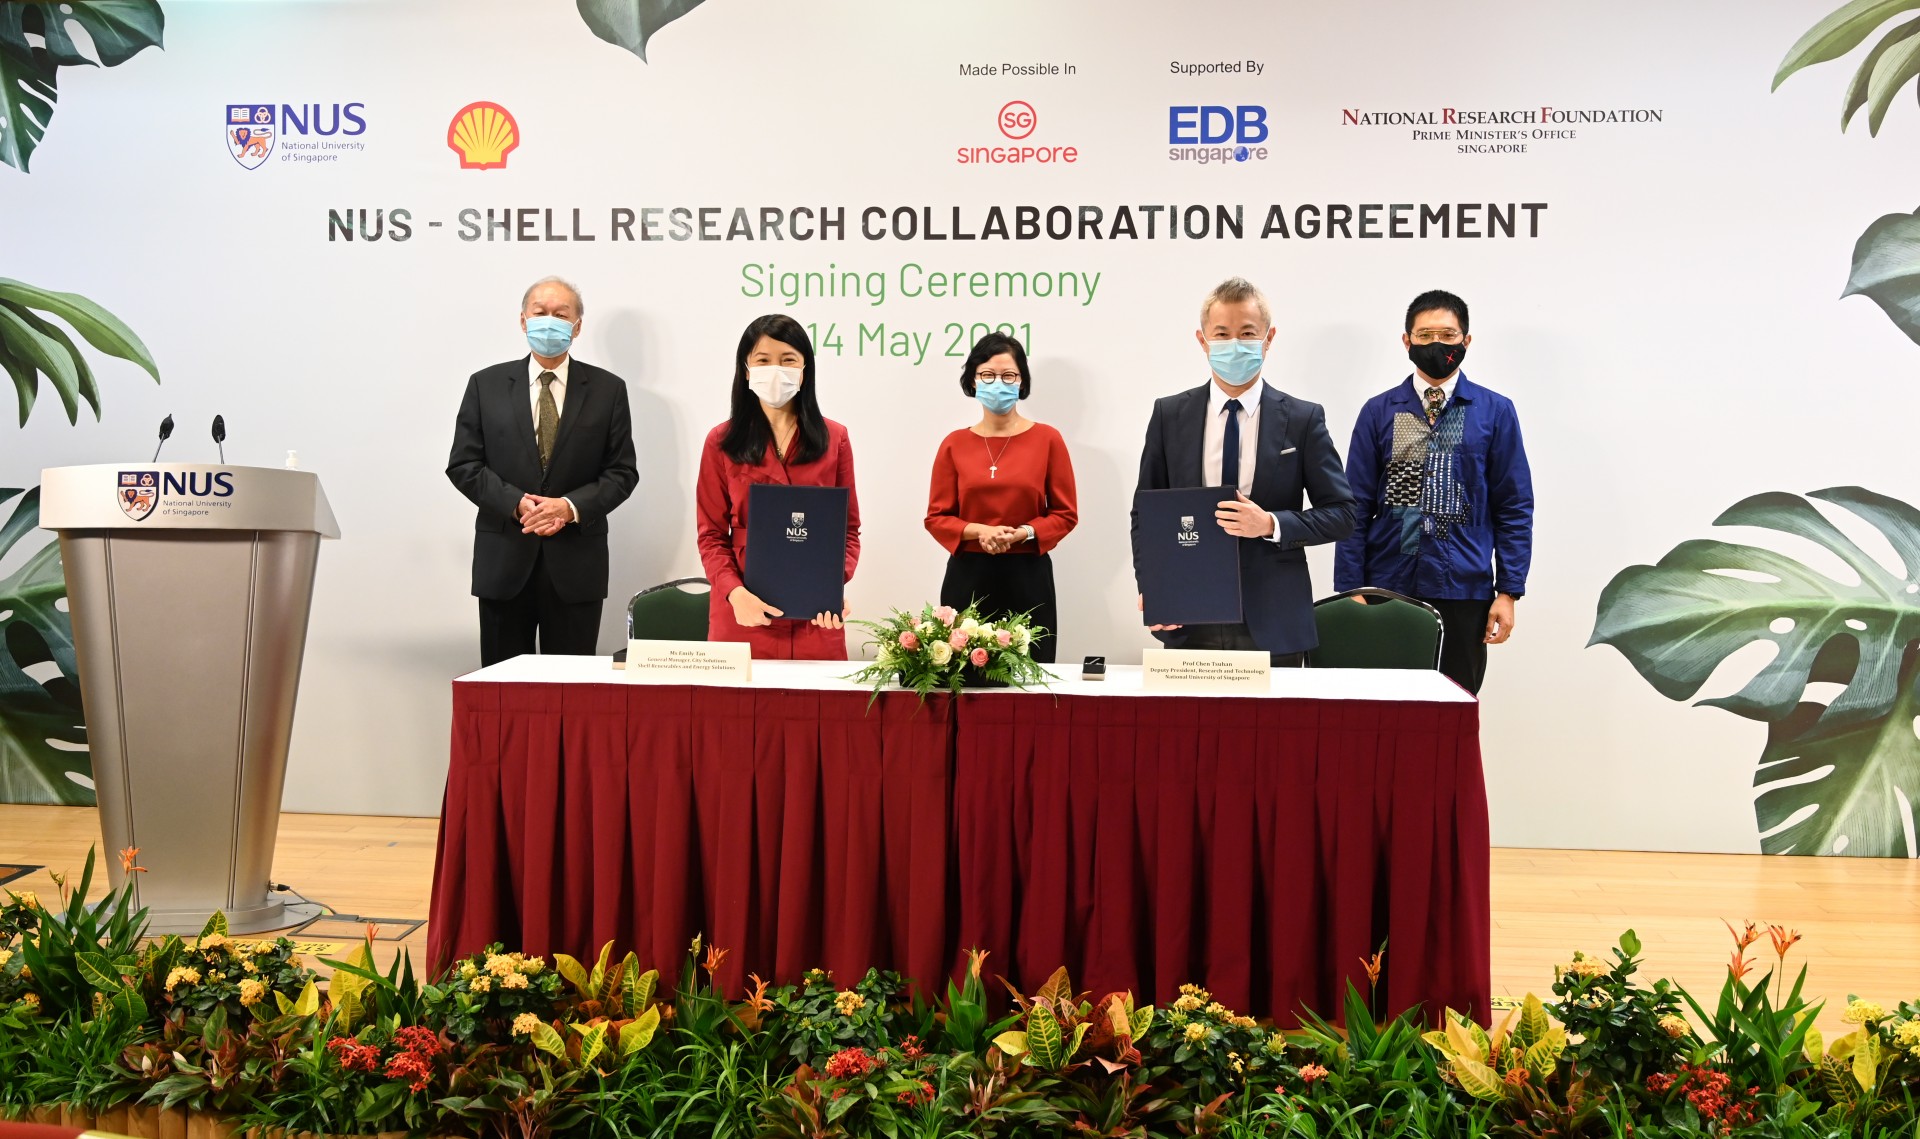 The research agreement was inked by (front row, from left) Ms Emily Tan, General Manager, City Solutions, Shell Renewables and Energy Solutions, and Professor Chen Tsuhan, NUS Deputy President (Research and Technology). The signing was witnessed by (back row, from left) Professor Low Teck Seng, Chief Executive Officer, National Research Foundation Singapore, Ms Aw Kah Peng, Chairman, Shell Companies in Singapore, and Mr Chng Kai Fong, Managing Director, Singapore Economic Development Board.